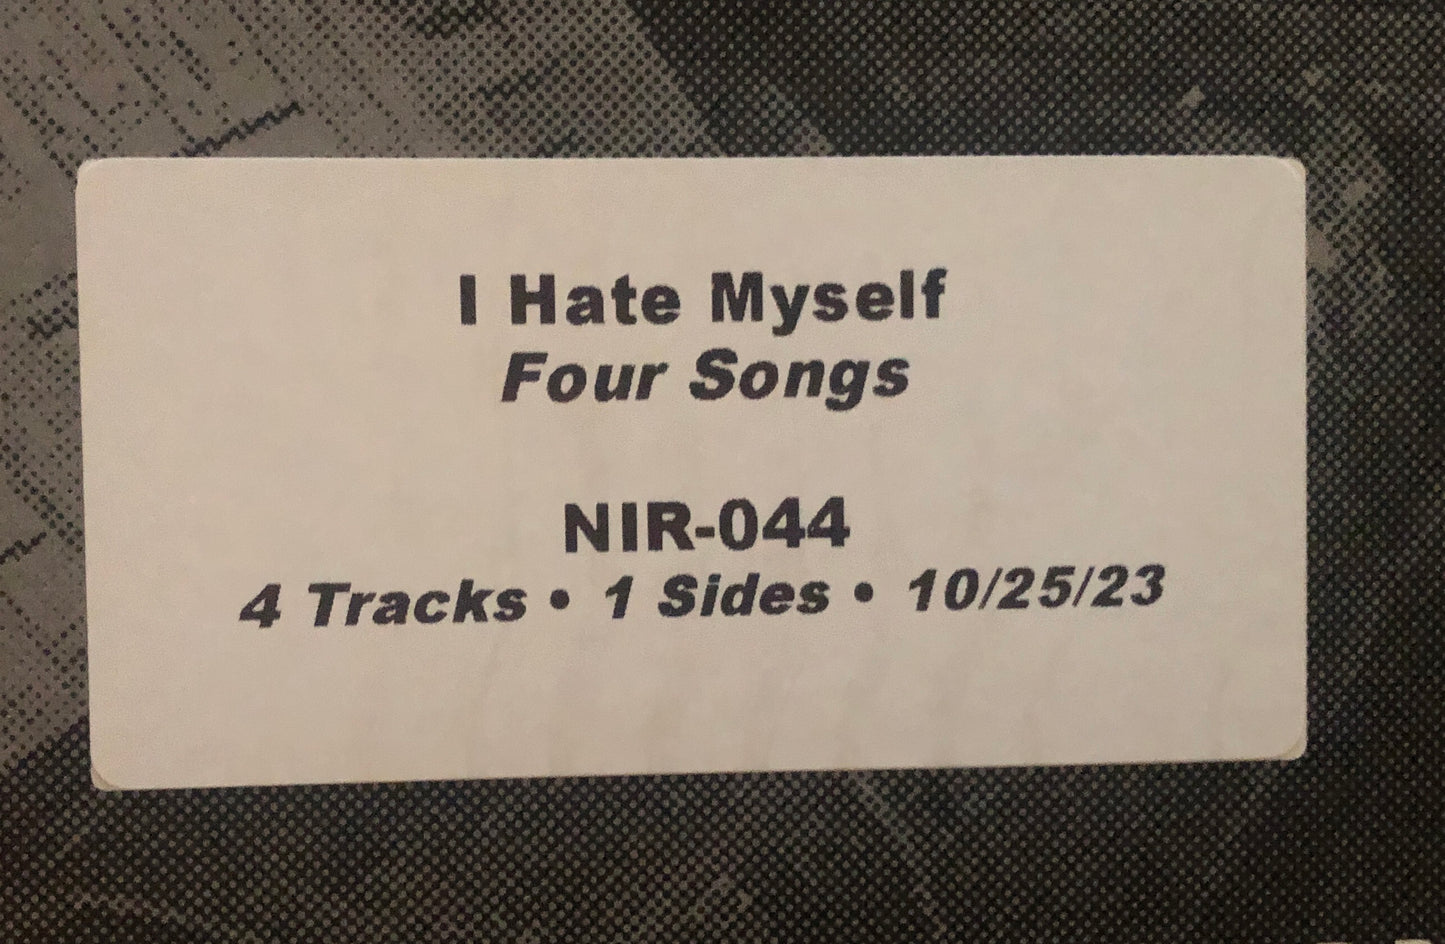 I HATE MYSELF "Four Songs" TEST PRESSING